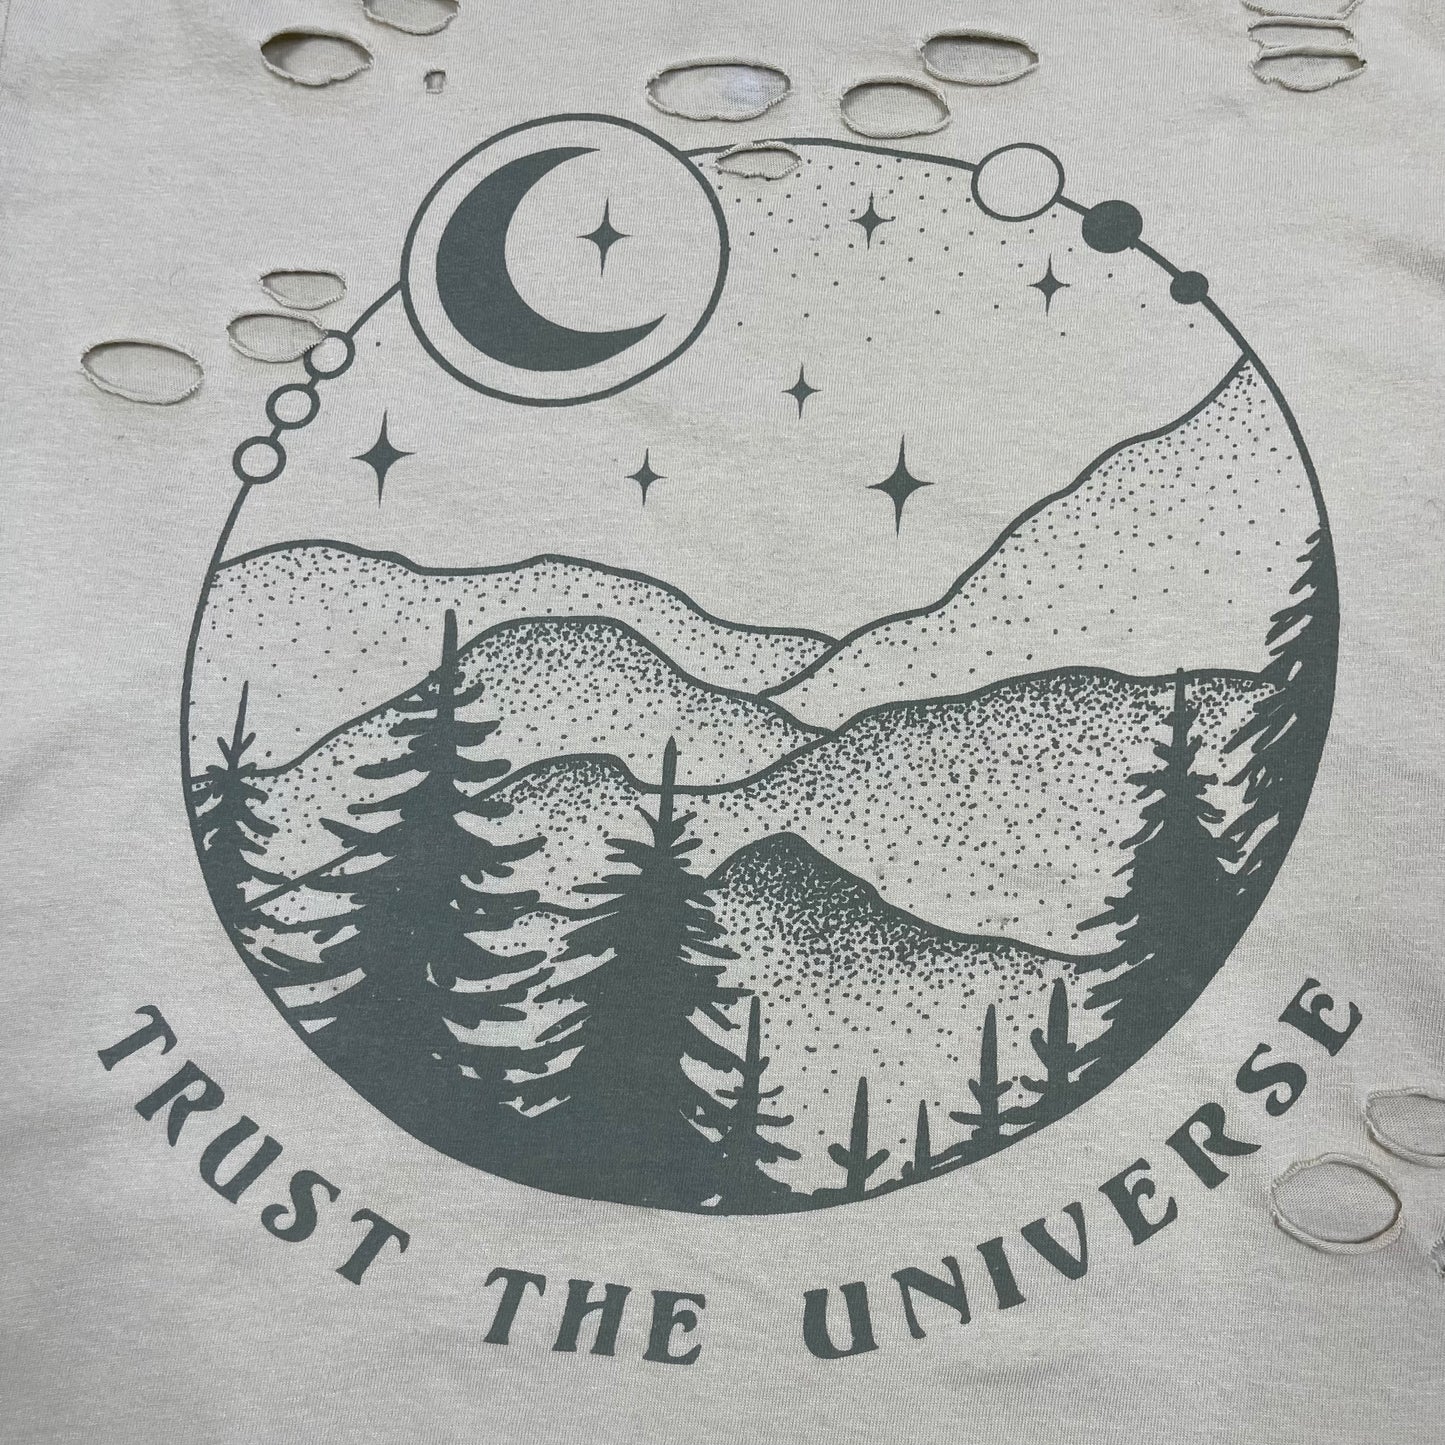 THRIFTED “TRUST THE UNIVERSE” TEE